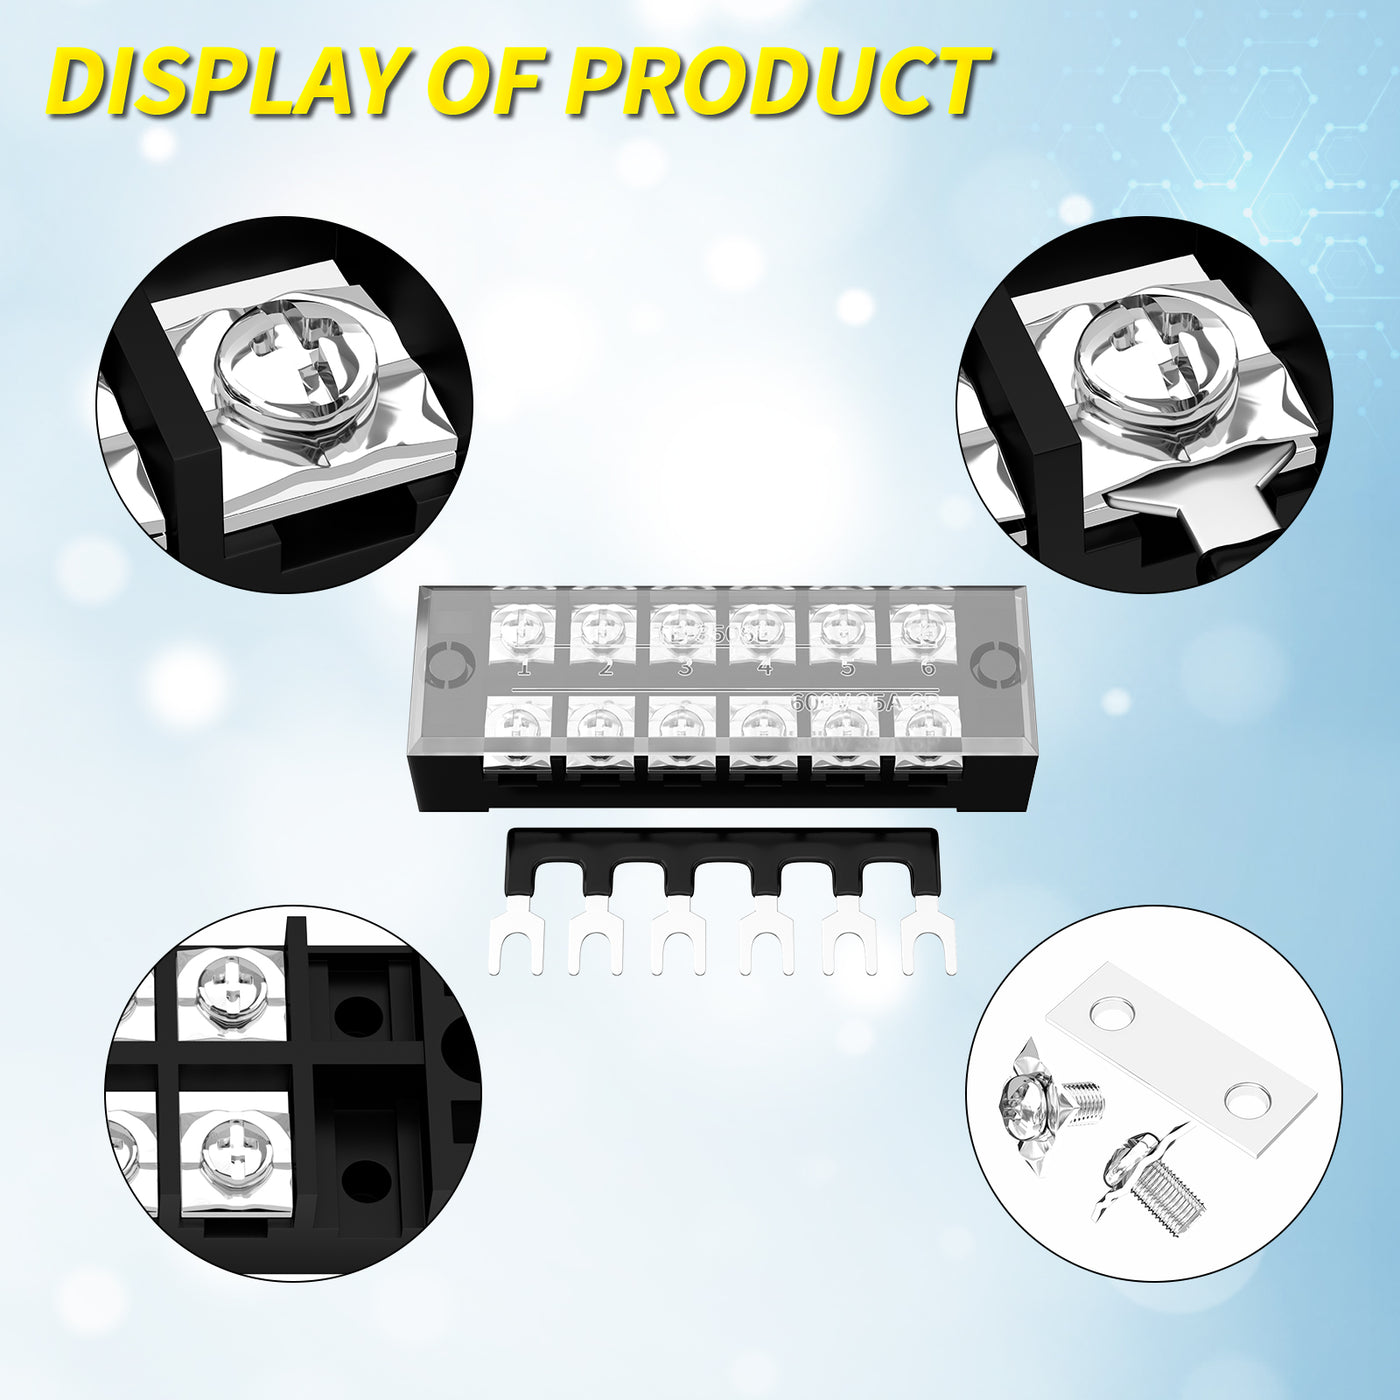 TB-3506 Dual Row 6 Position Terminal Block Display of Product